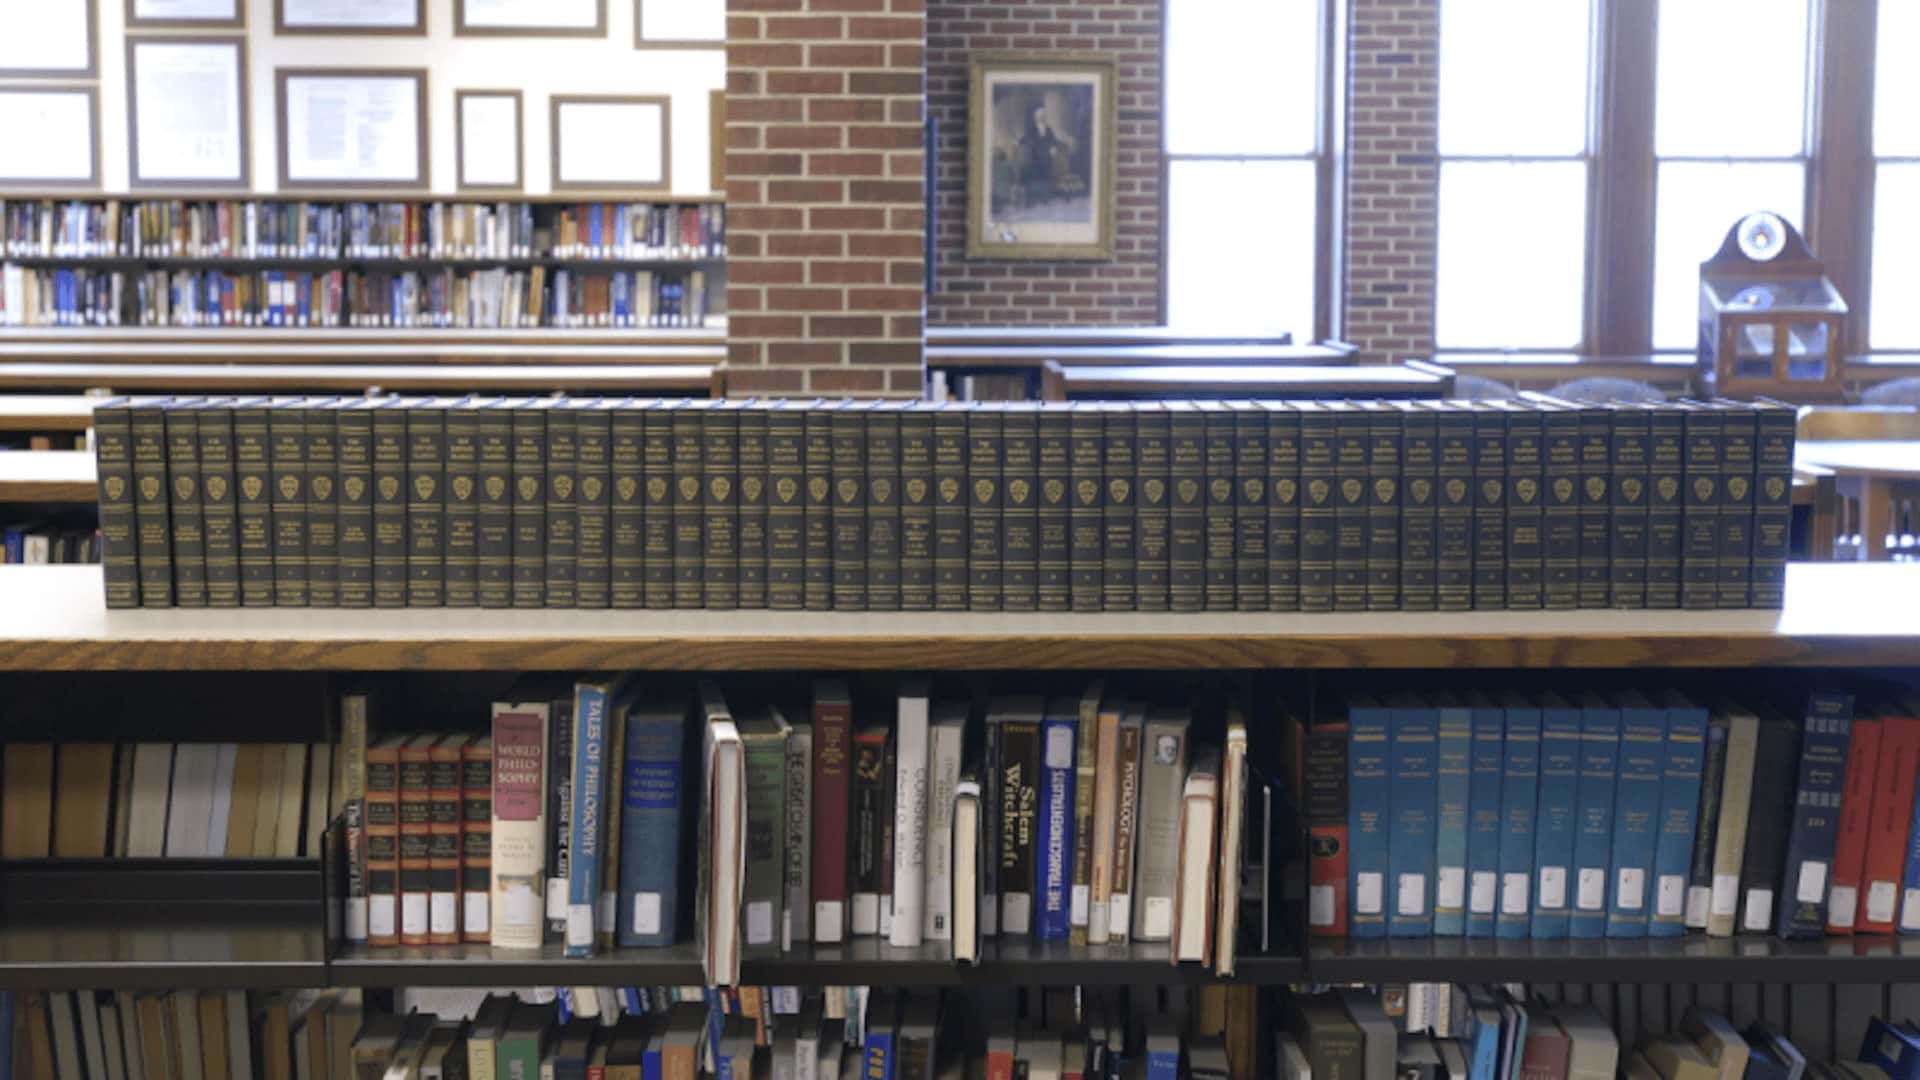 A large book collection sitting on a shelf in the Hillsdale College library.